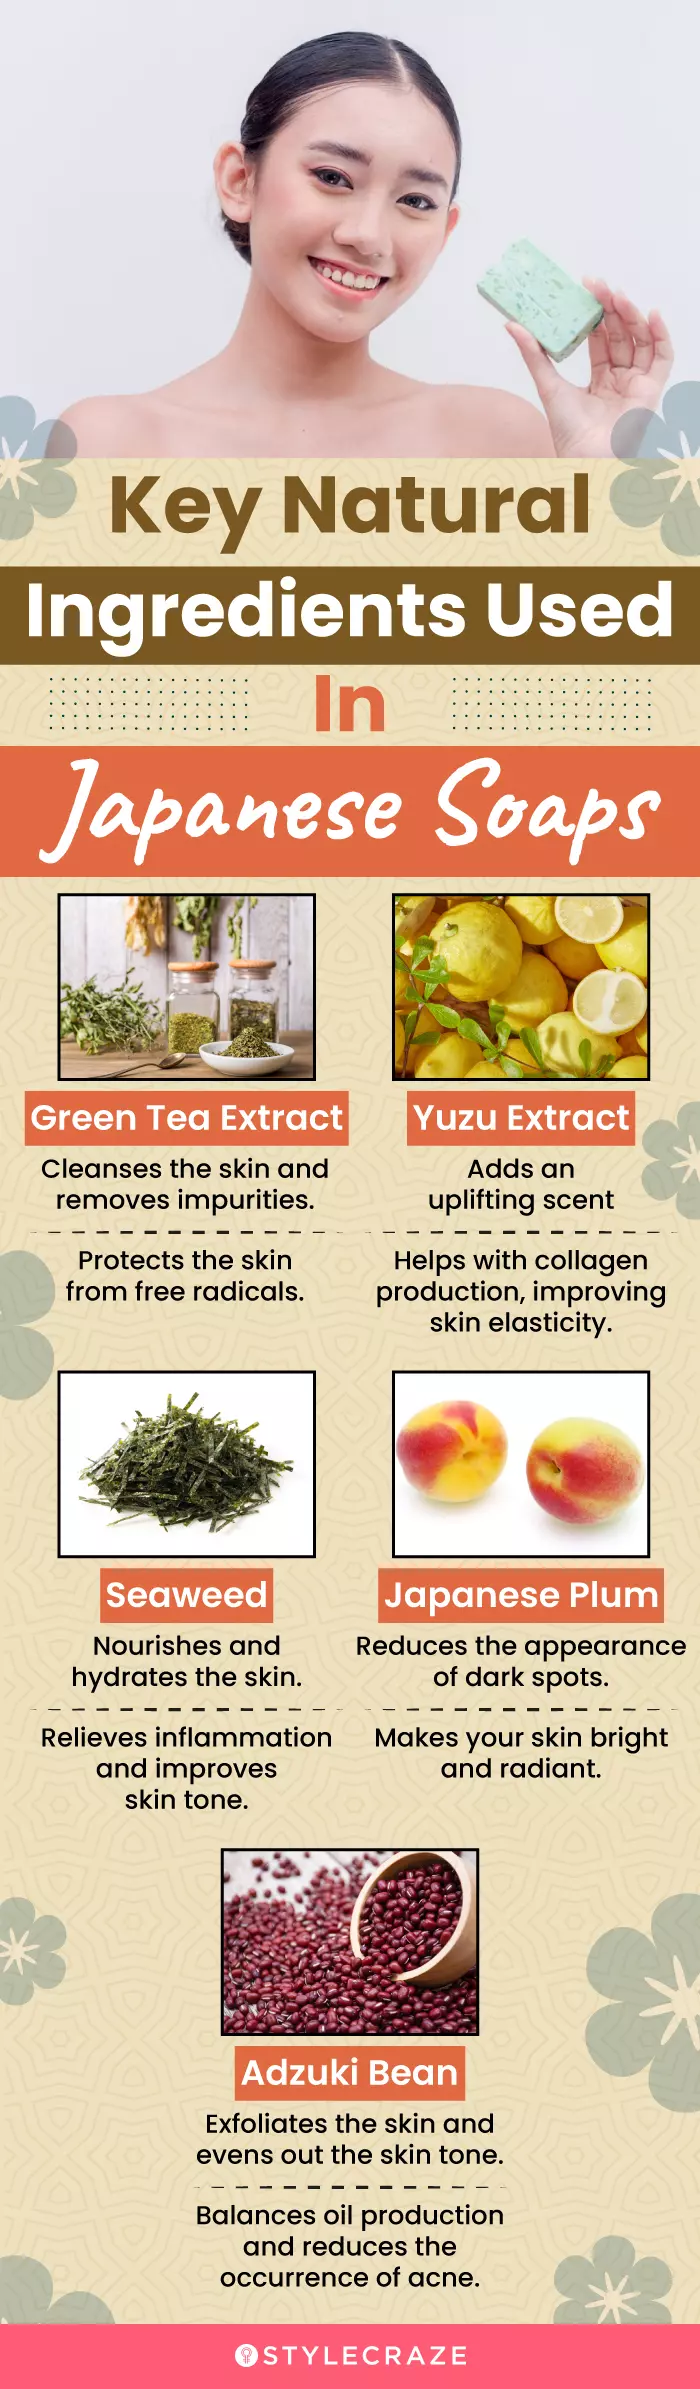 Key Natural Ingredients Used In Japanese Soaps (infographic)